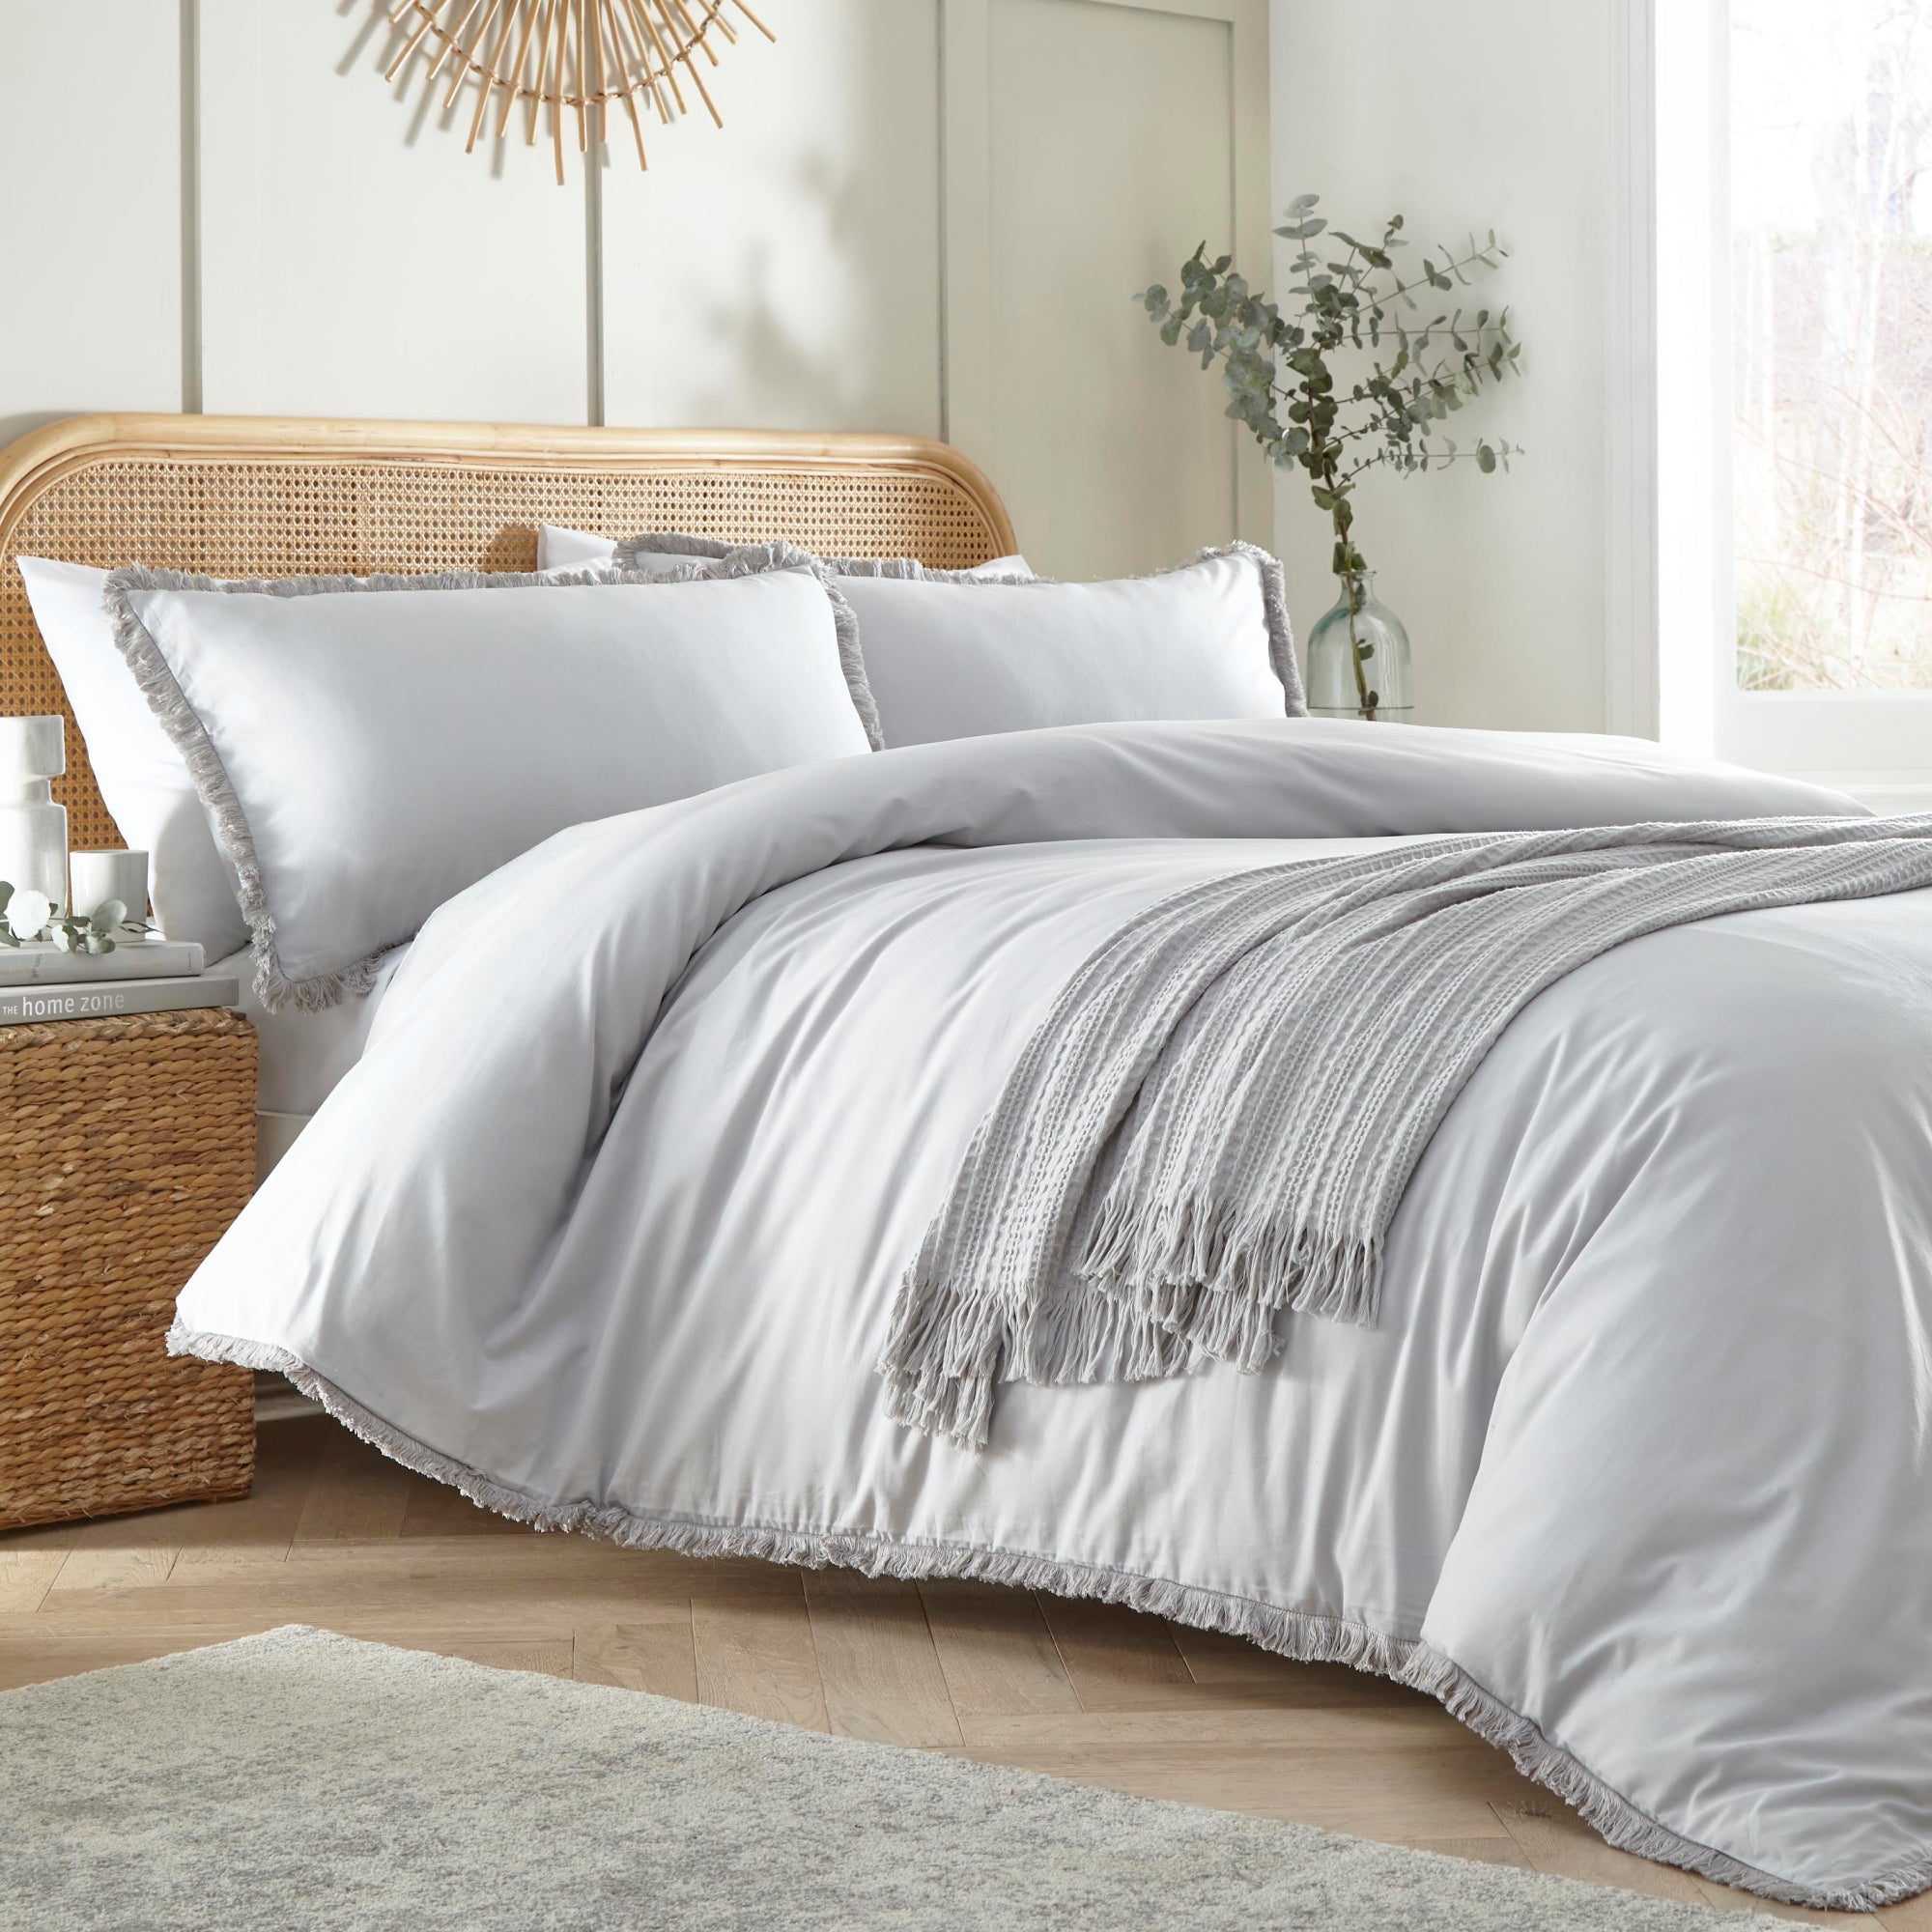 Duvet Cover Set Claire by Appletree Loft in Grey